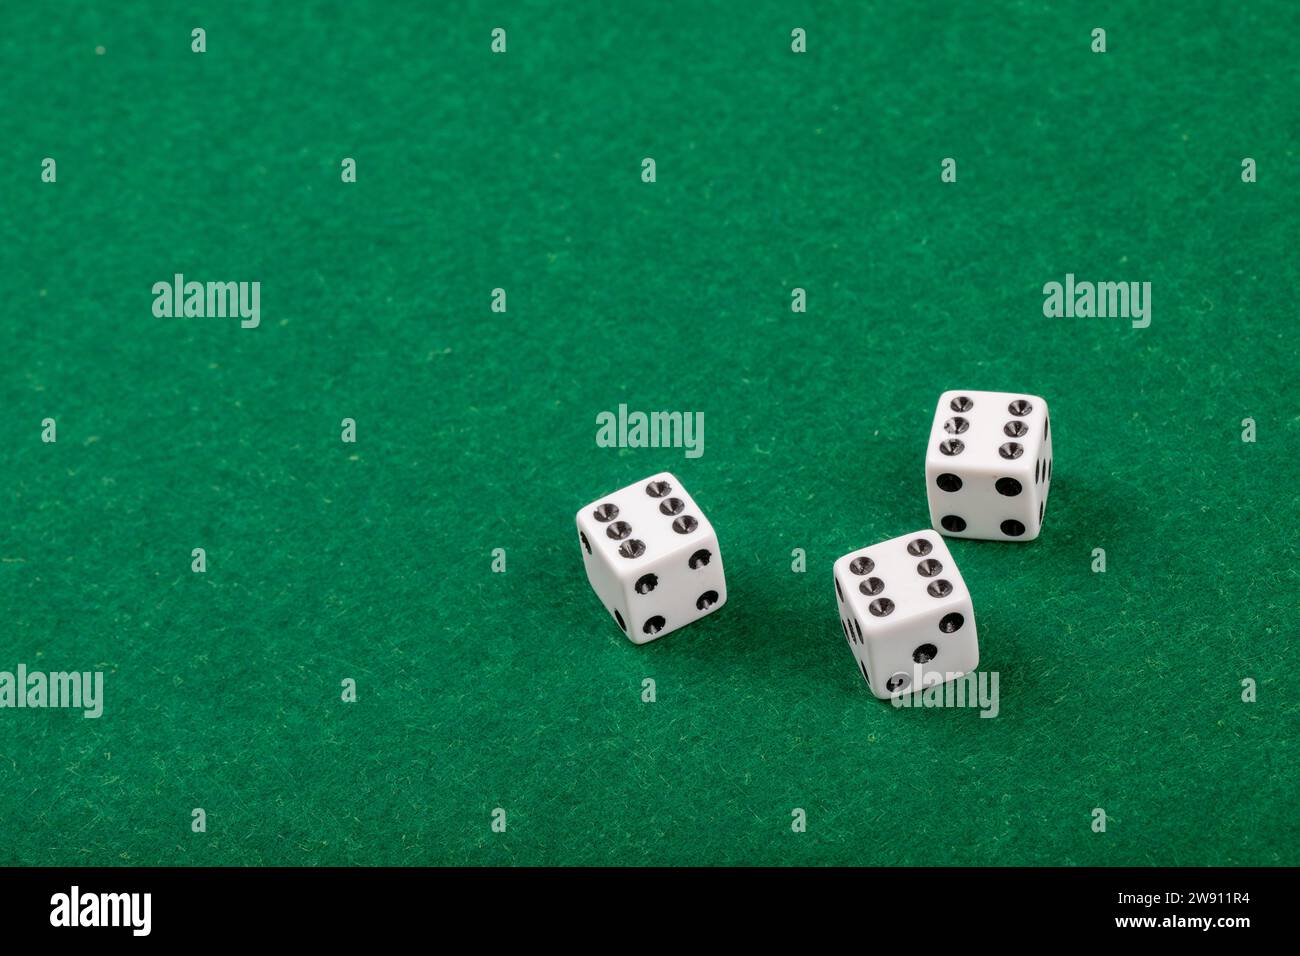 Three White Dice on Green Velvet Casino Table for Gaming and Gambling Stock Photo